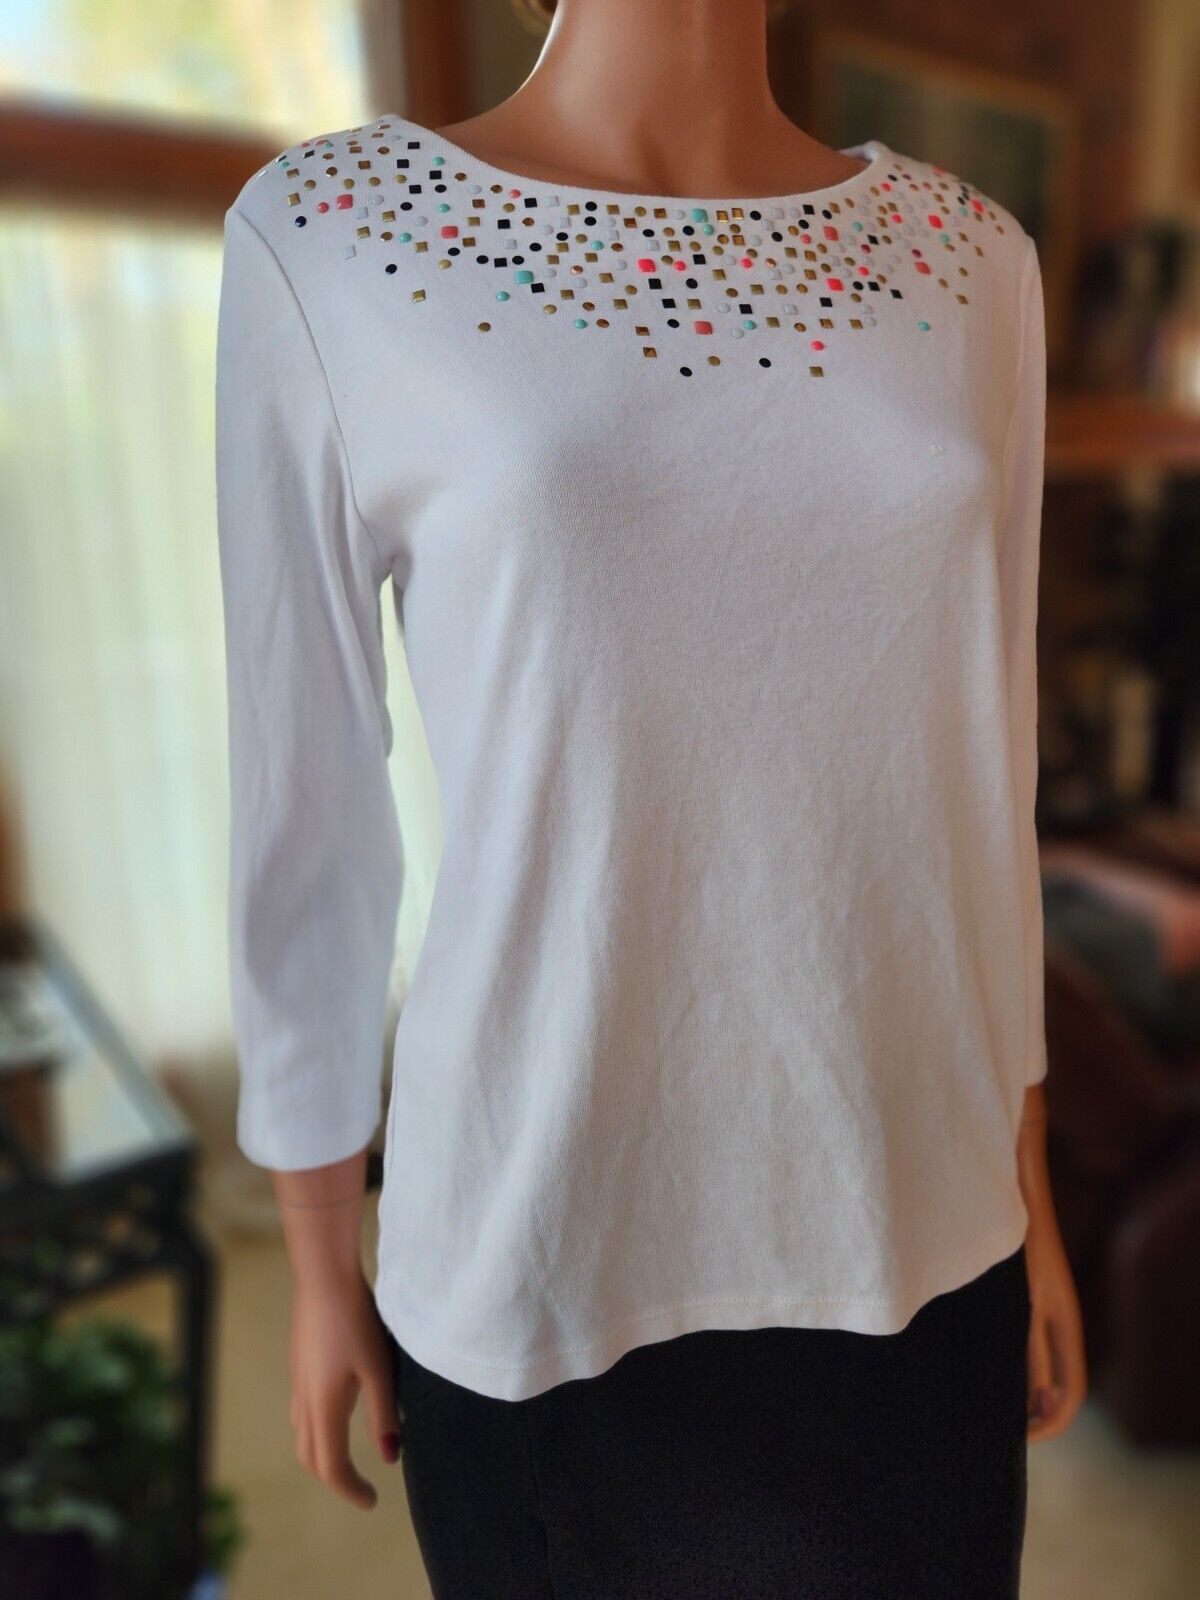 Primary image for Rafaella Womens Tee Size L/G White Studded Embellished Boat Neck 3/4 Sleeve Top